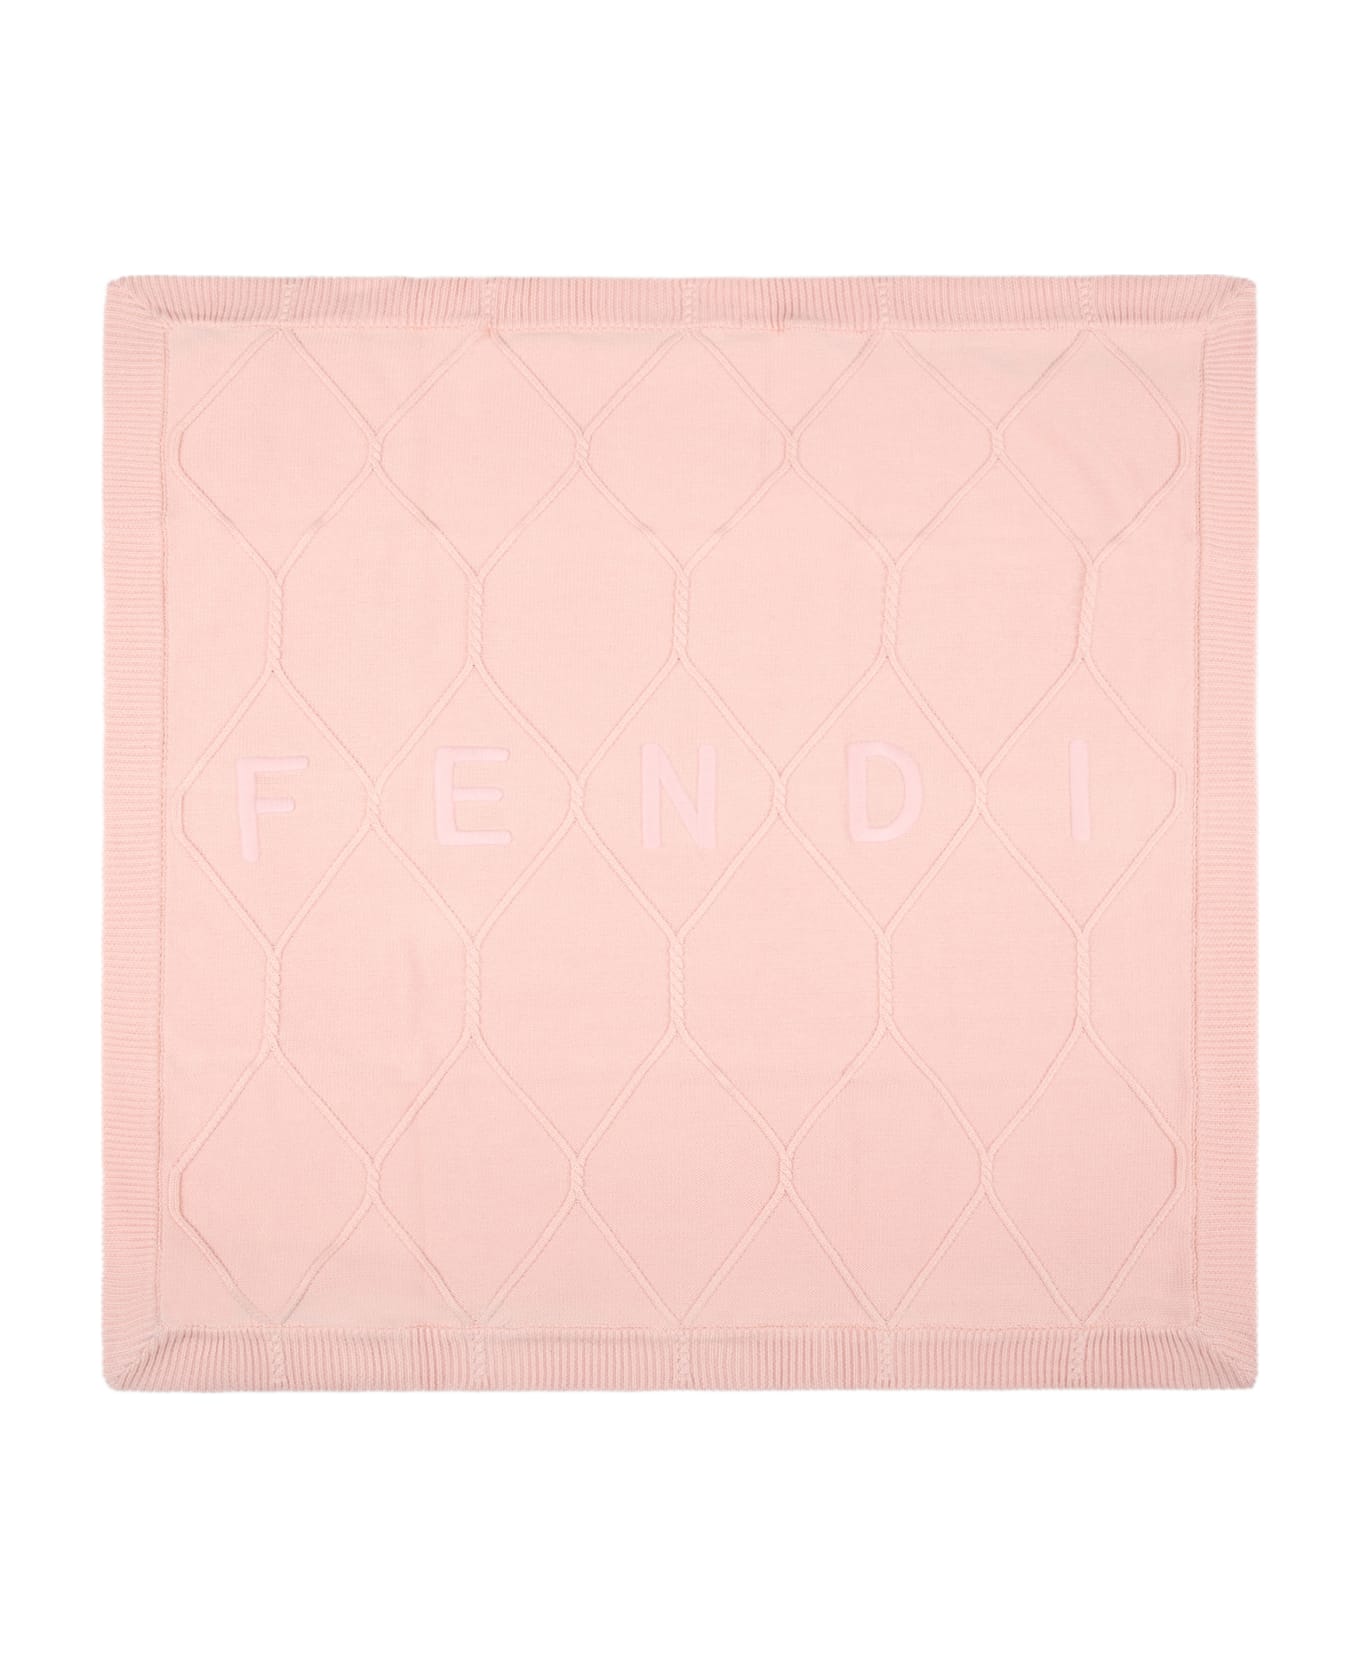 Fendi Pink Blanket For Baby Girl With Logo - Pink アクセサリー＆ギフト